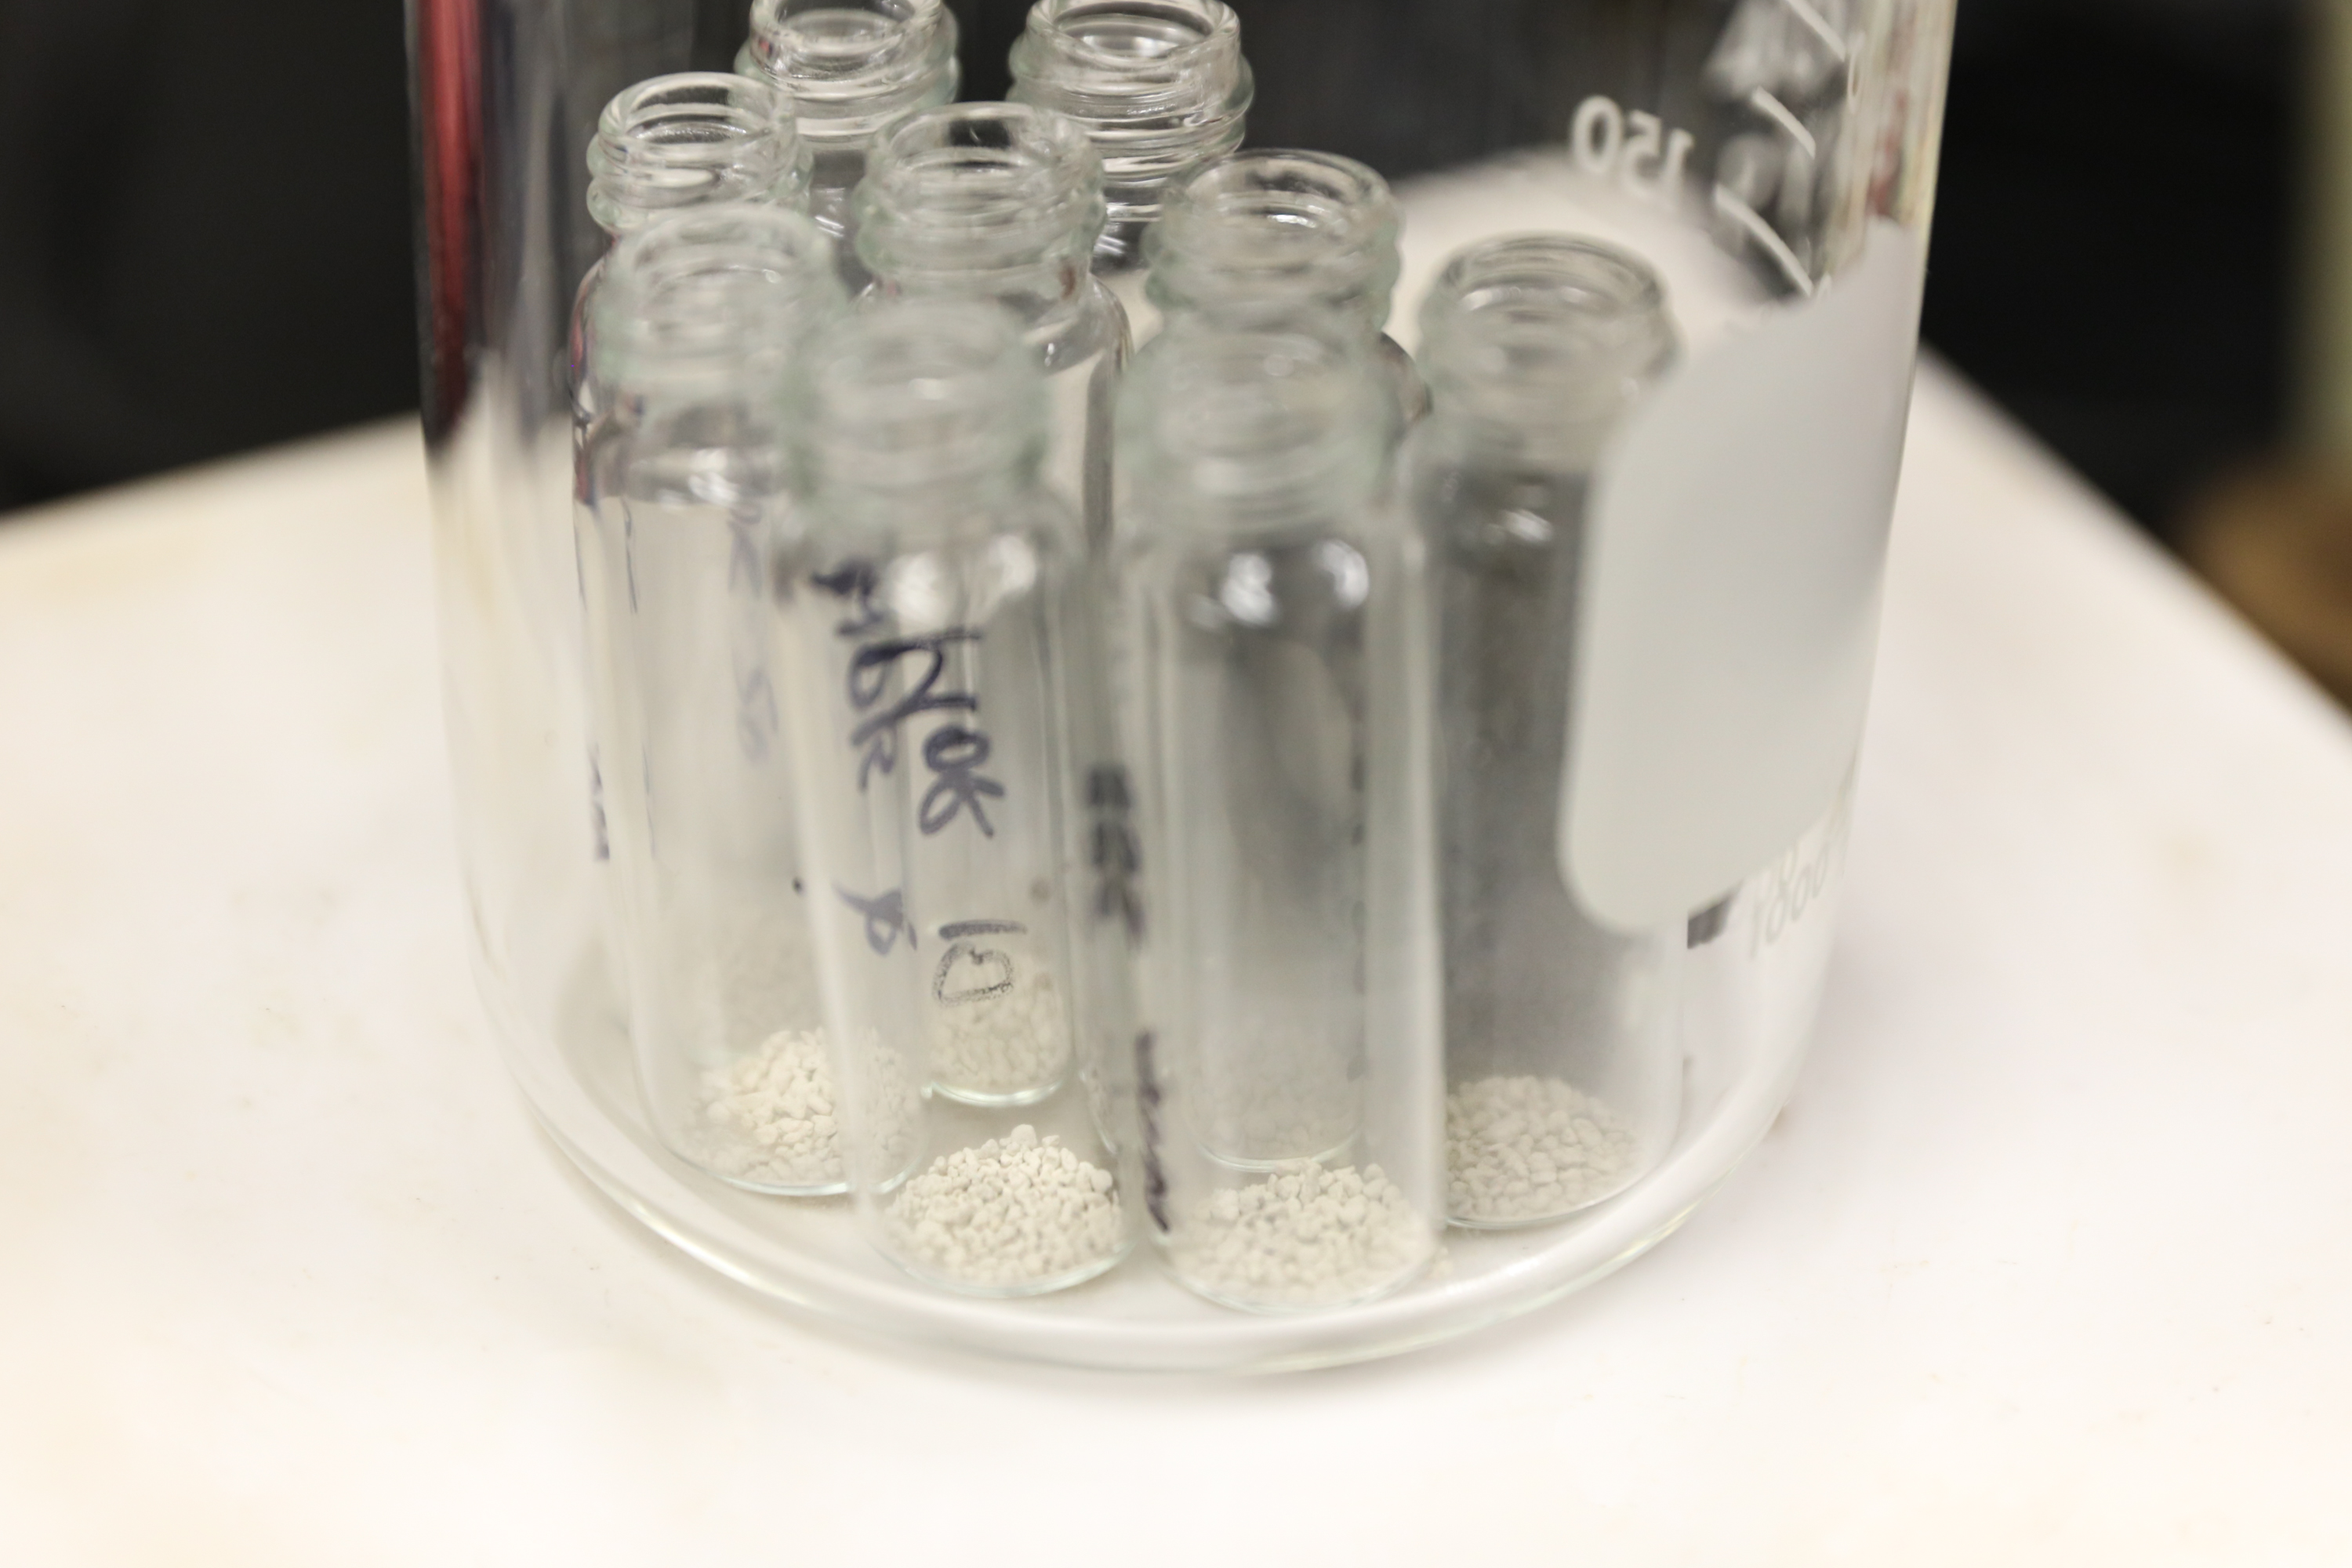 Sand and clay water filter samples were analyzed using neutron scattering and the SNS user laboratories to see how they interacted with water containing the chemical bisphenol A, also known as BPA. (Image credit: ORNL/Genevieve Martin)